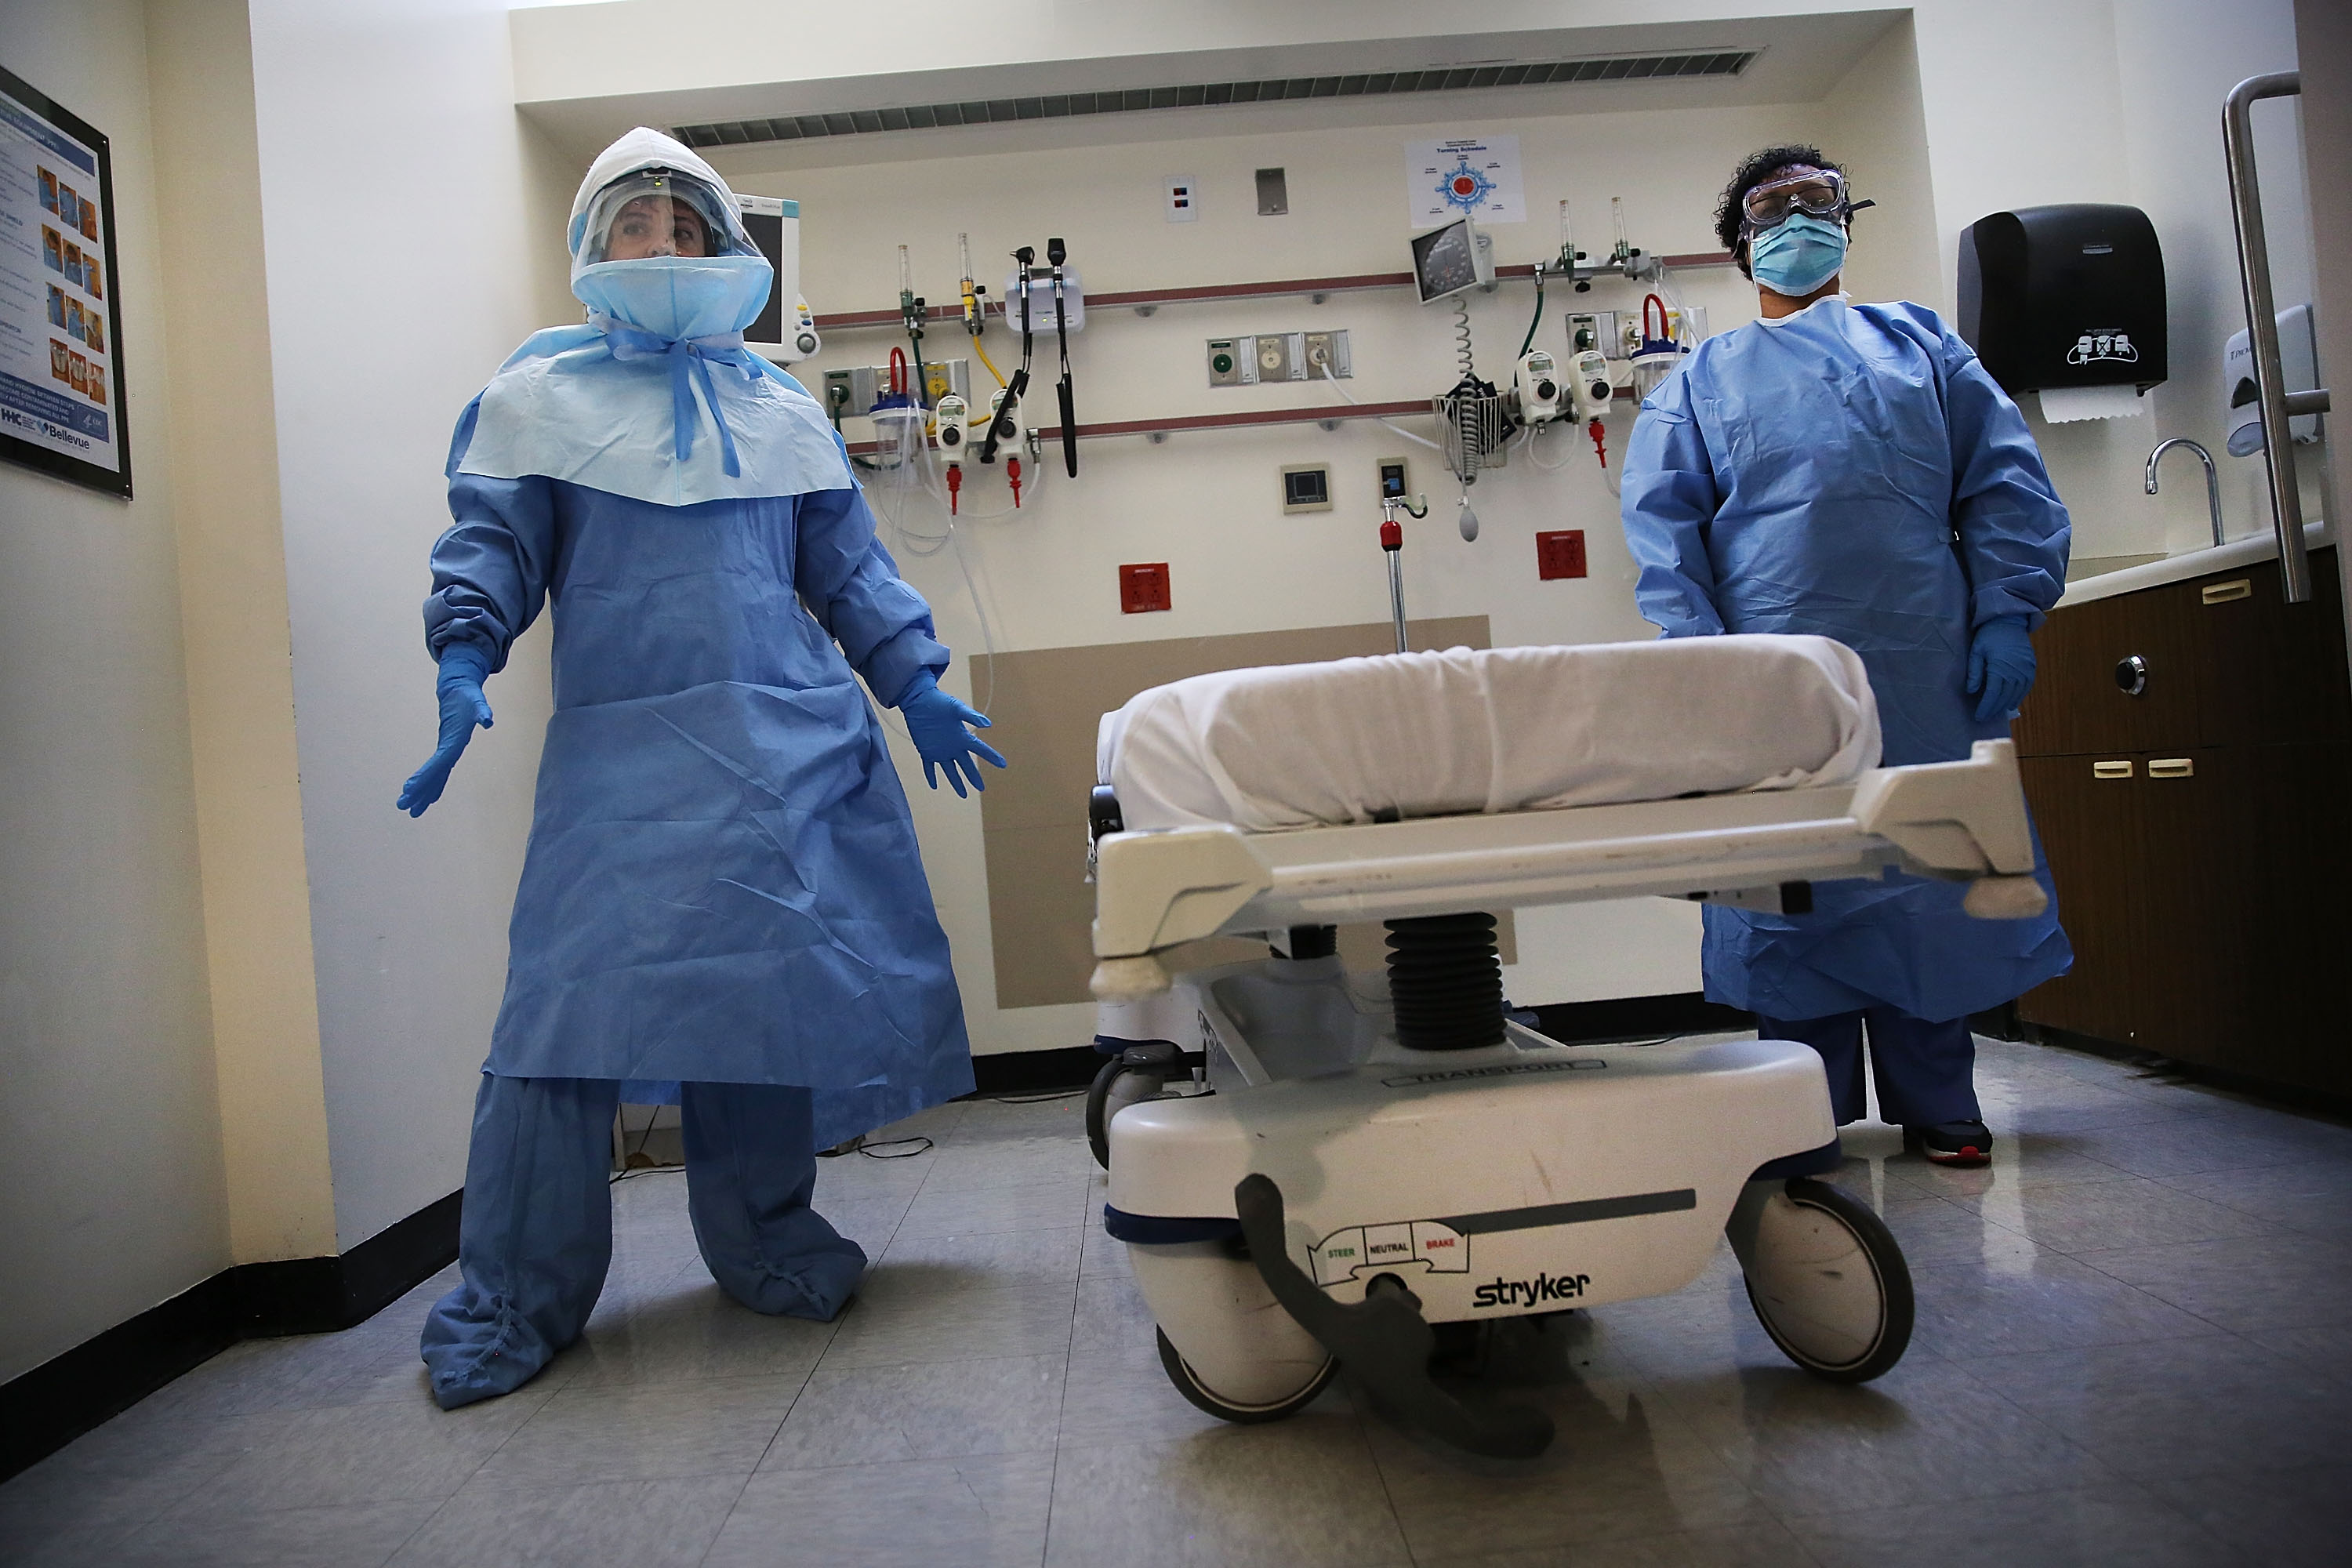 Members of Bellevue Hospital staff wear protective clothing as they demonstrate how they would receive a suspected Ebola patient on Oct. 8, 2014 in New York City. (Spencer Platt&mdash;Getty Images)